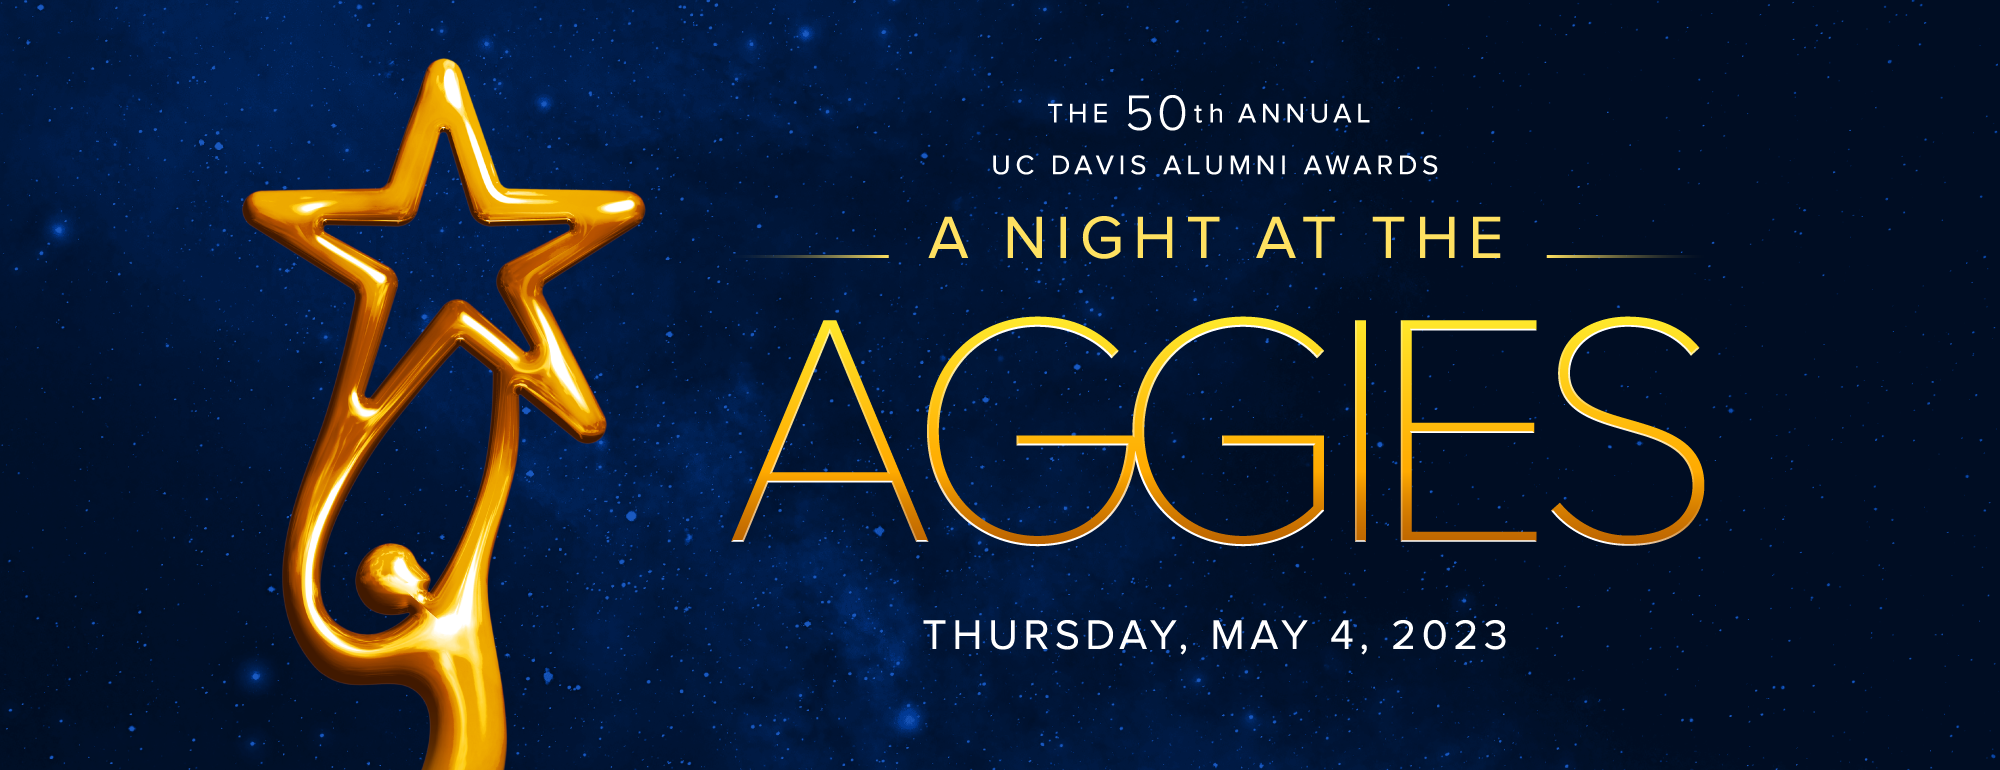 Blue background with stars in the night sky. Text reads "A night at the Aggies" and "the 50th annual UC Davis alumni awards" with the date "Thursday, May 4, 2023". There is a gold statue of a person holding up a star in the middle.